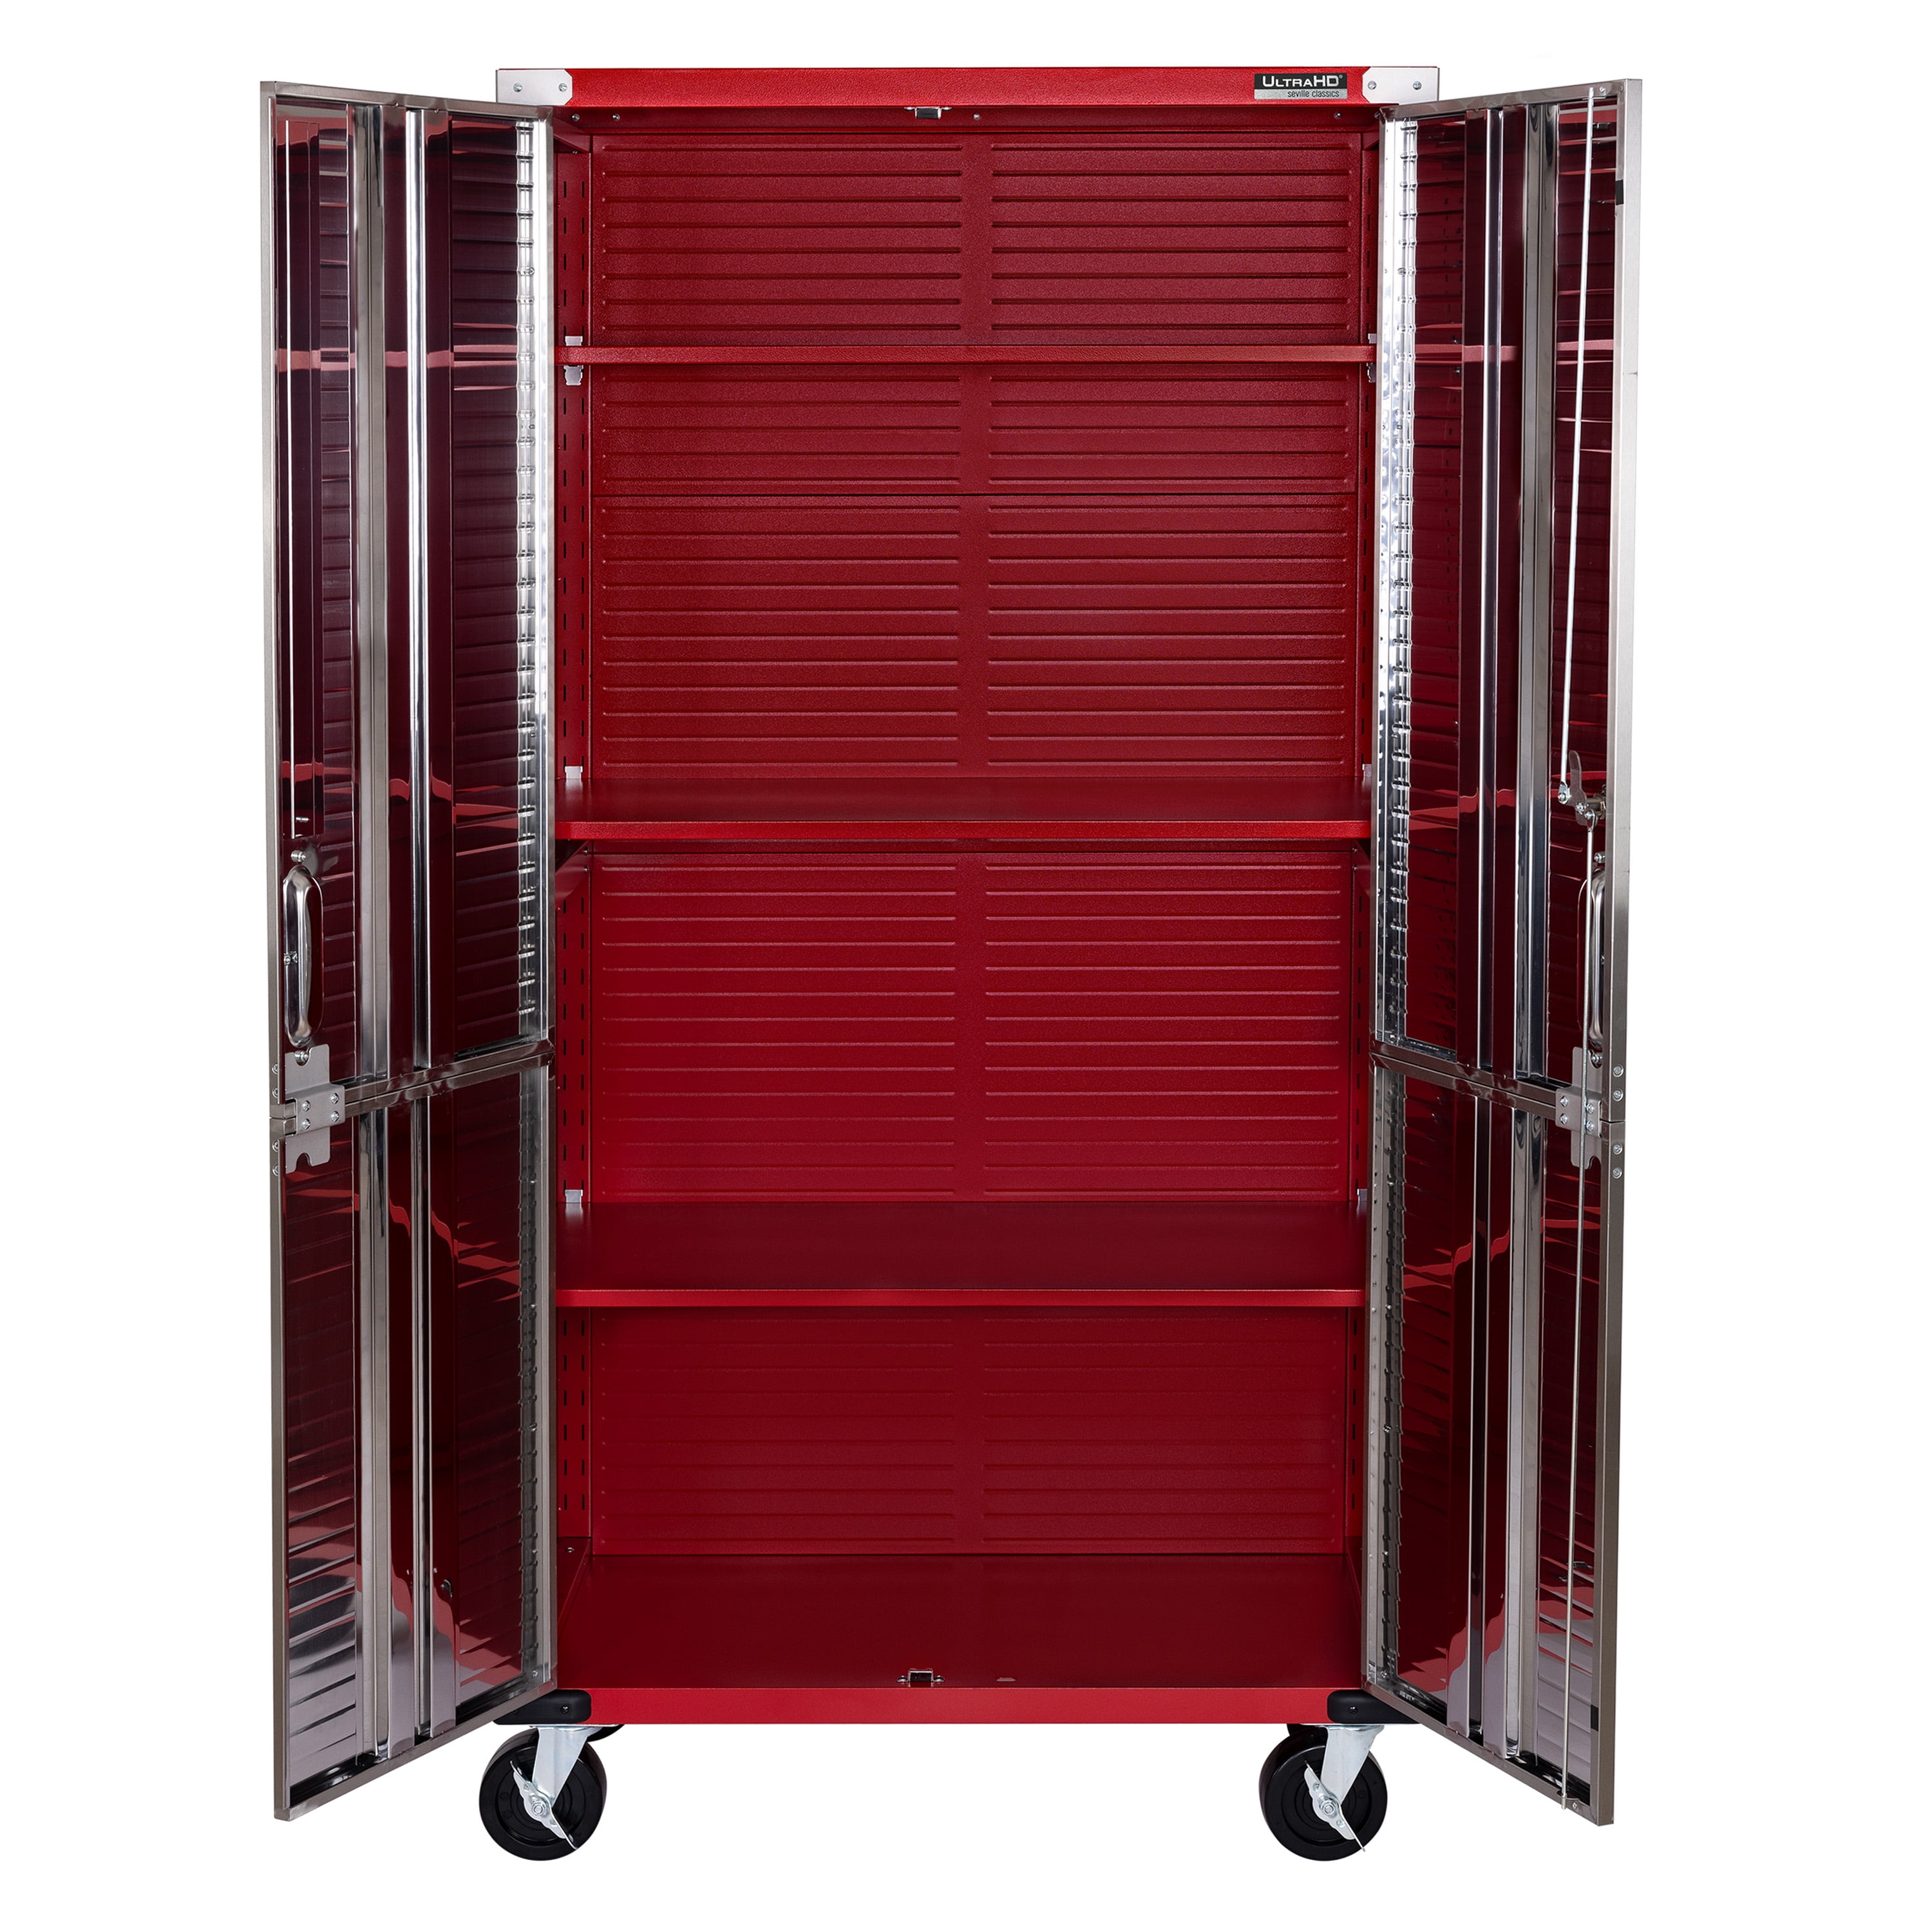 67 Tall Assembled Mobile Bin Storage Cabinet with 18 6 Bins - 80249 –  Steven's I.D. Systems